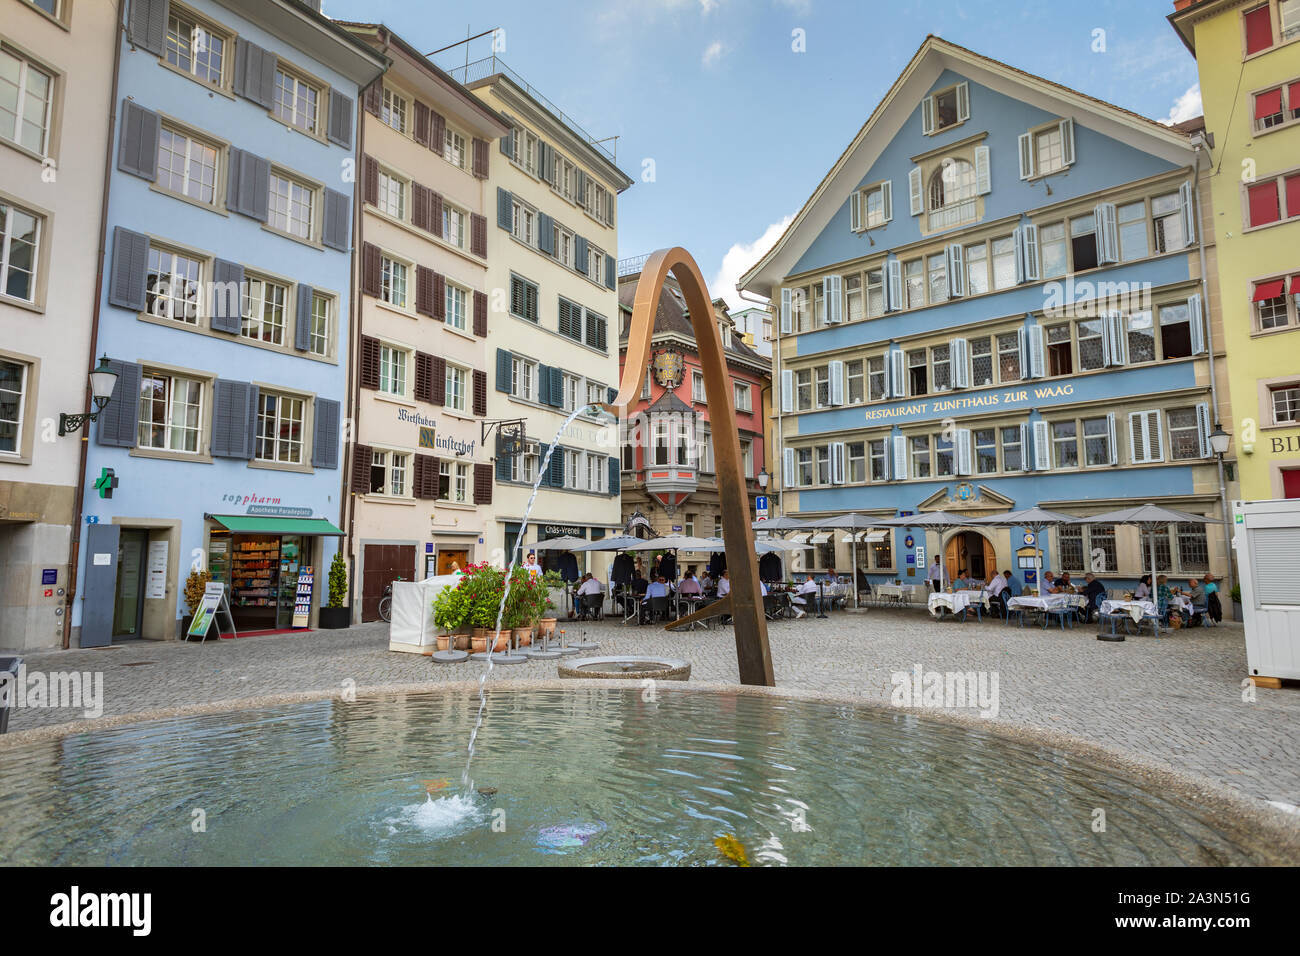 Street Münsterhof in old center of Zurich with public fountain, restaurants with outdoor terraces and colorful buildings Stock Photo